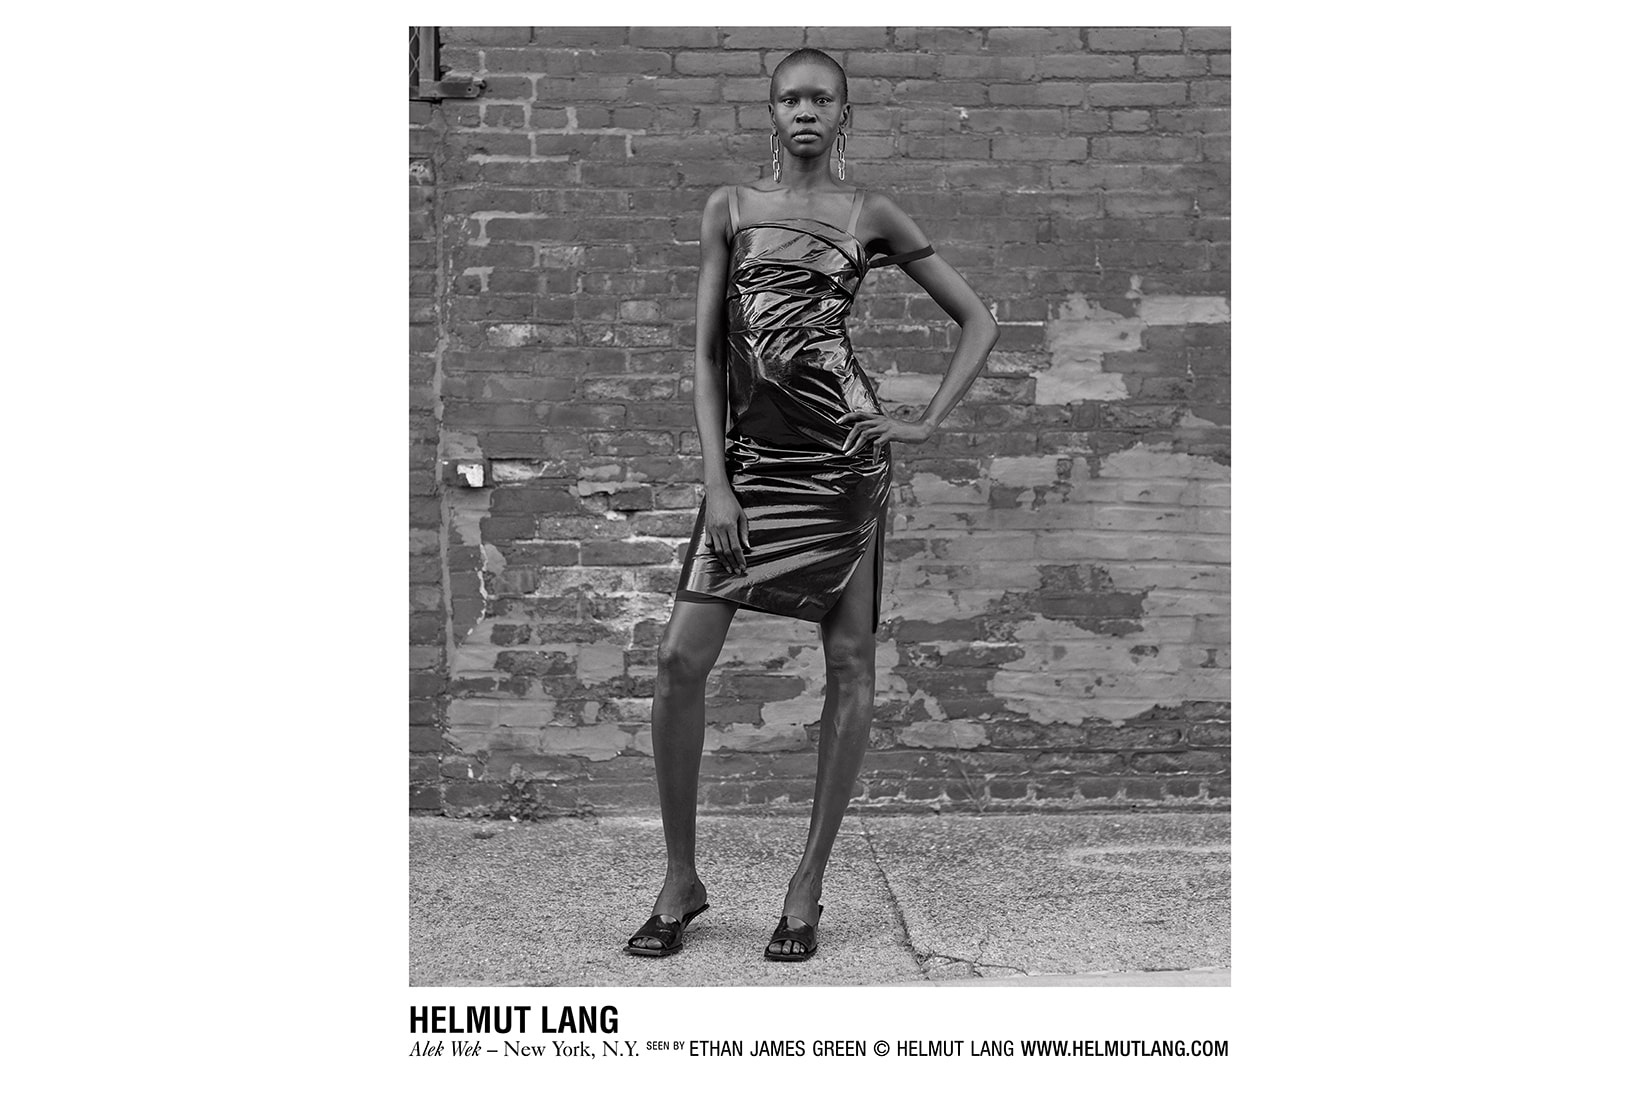 Helmut Lang new FW17 advertising campaign